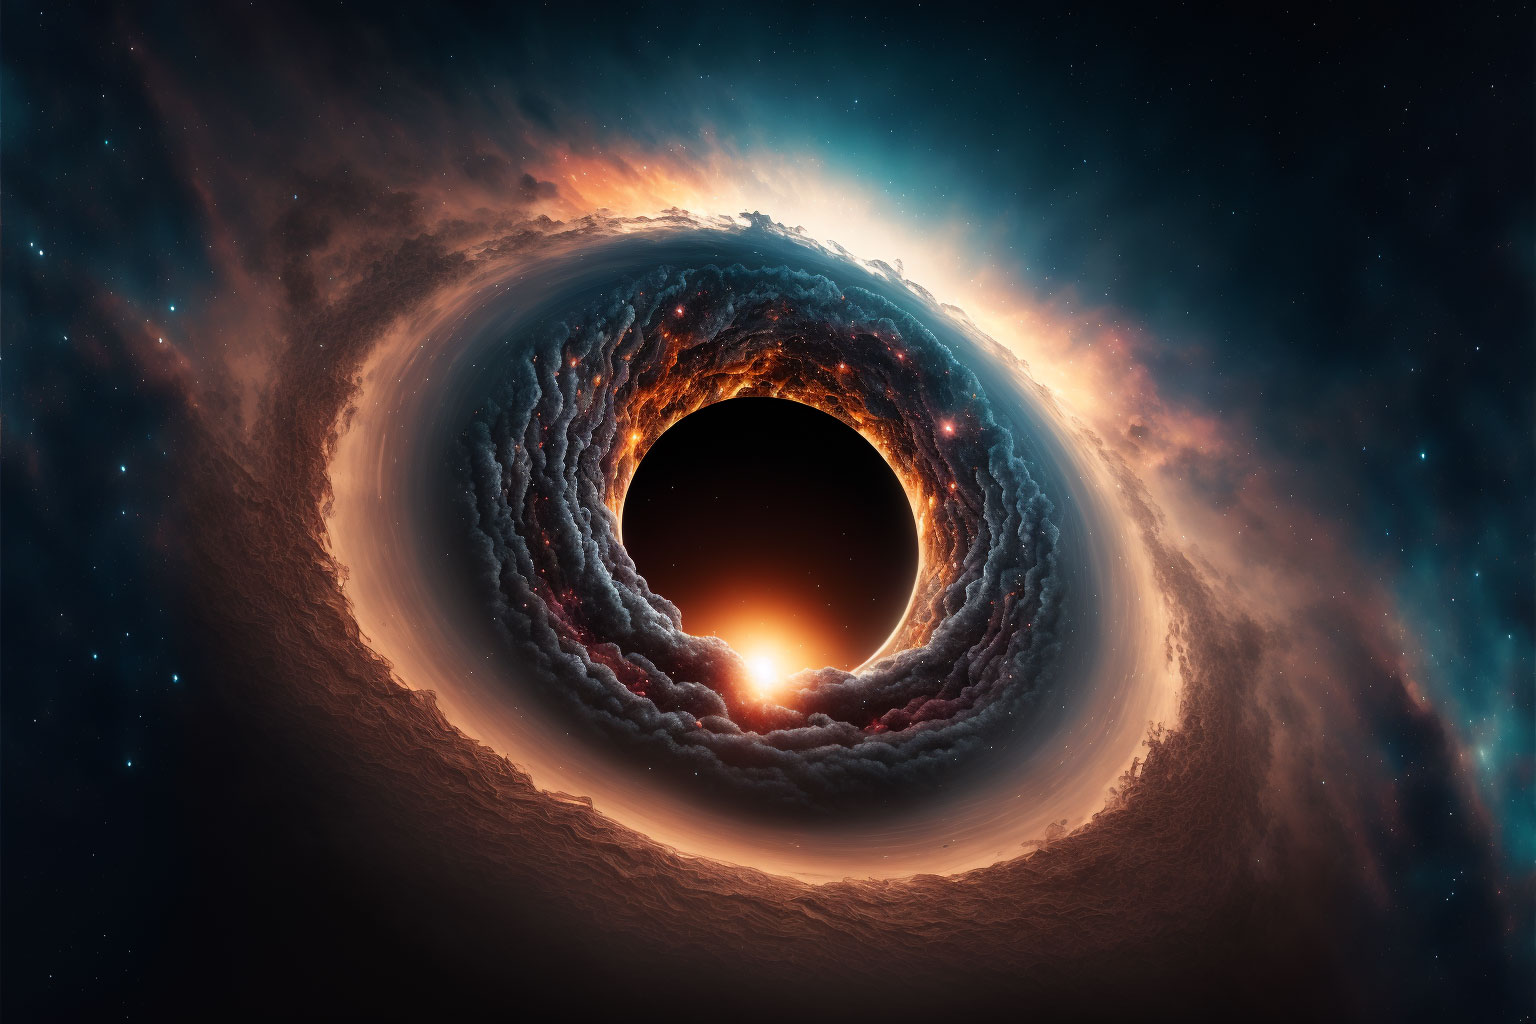 NASA suddenly announced the discovery of a mysterious cosmic black hole ...